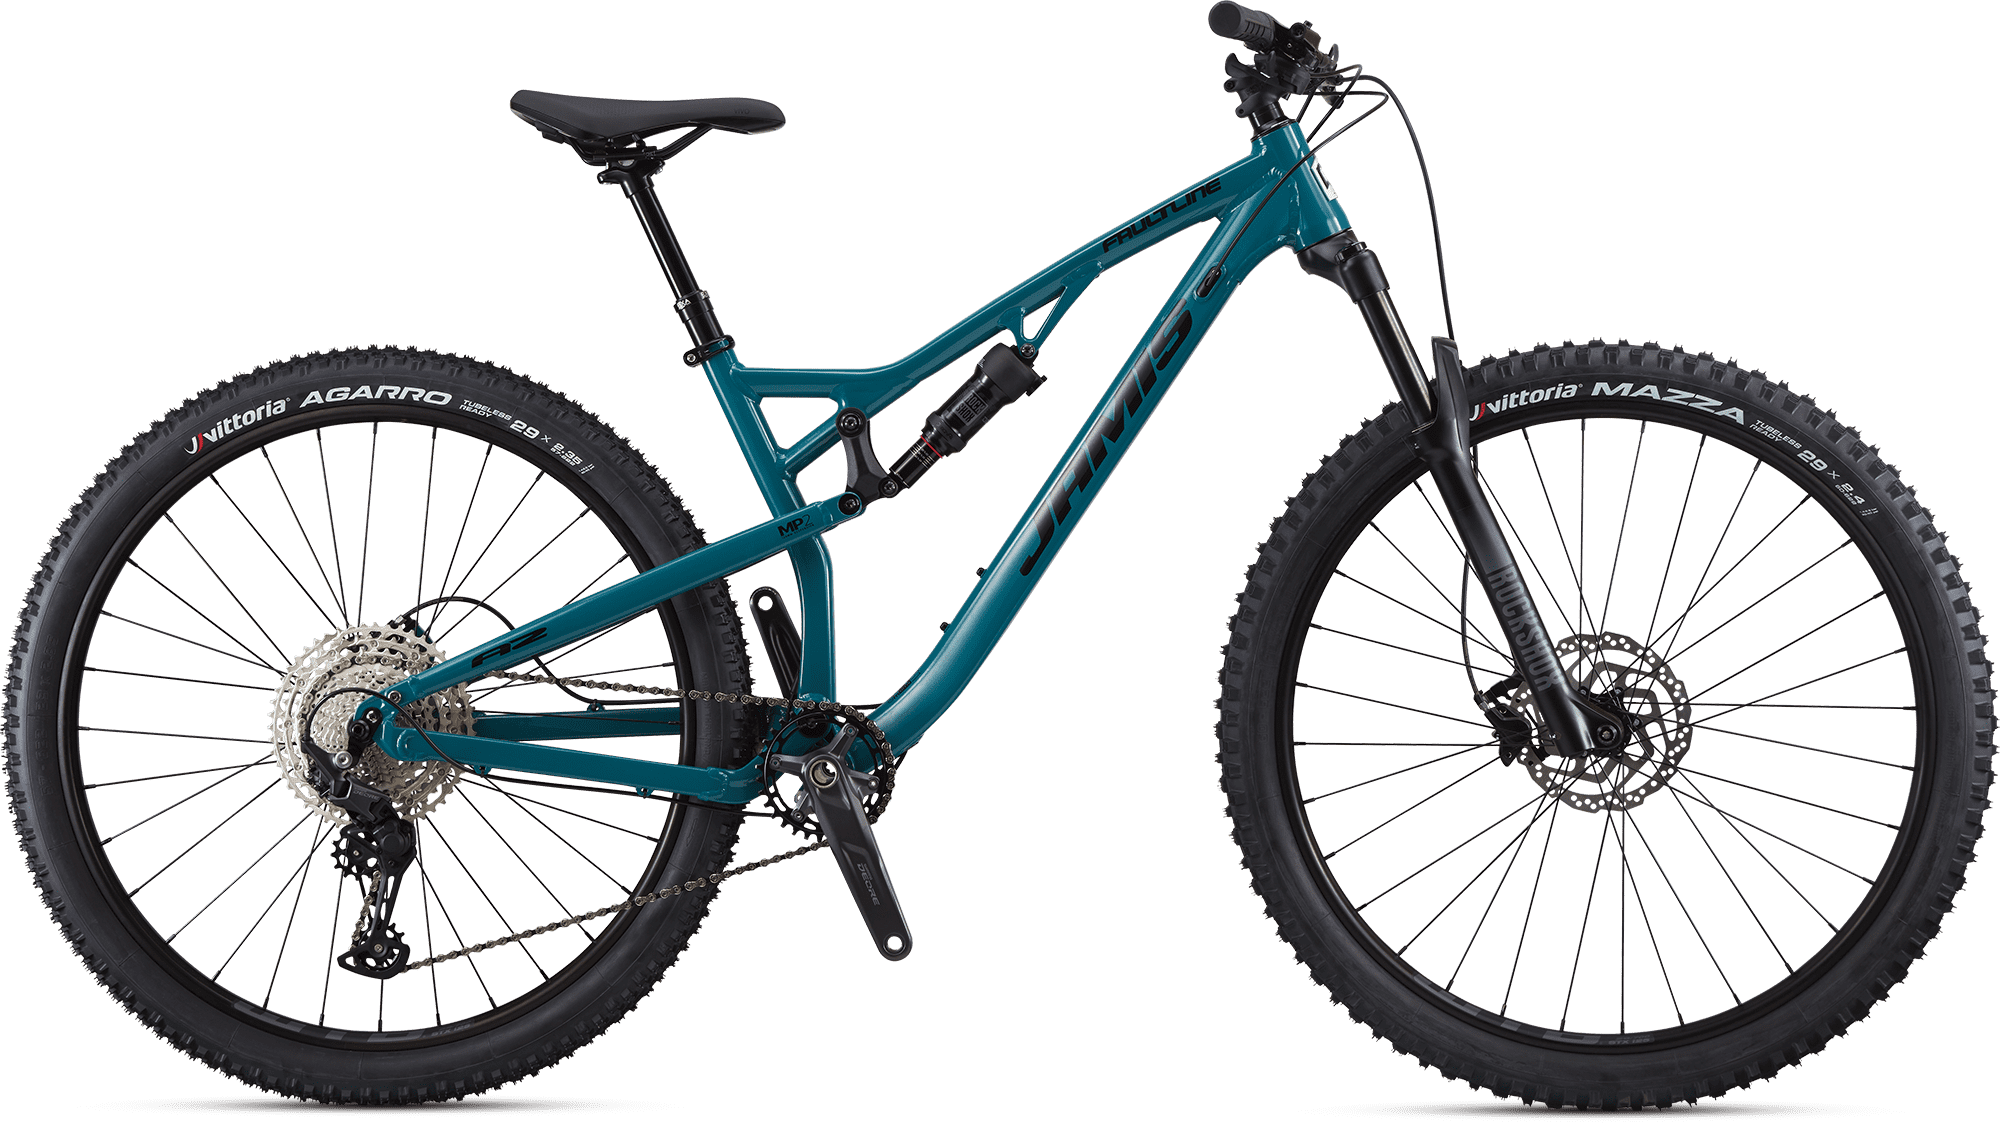 Jamis Faultline A2 718 Cyclery